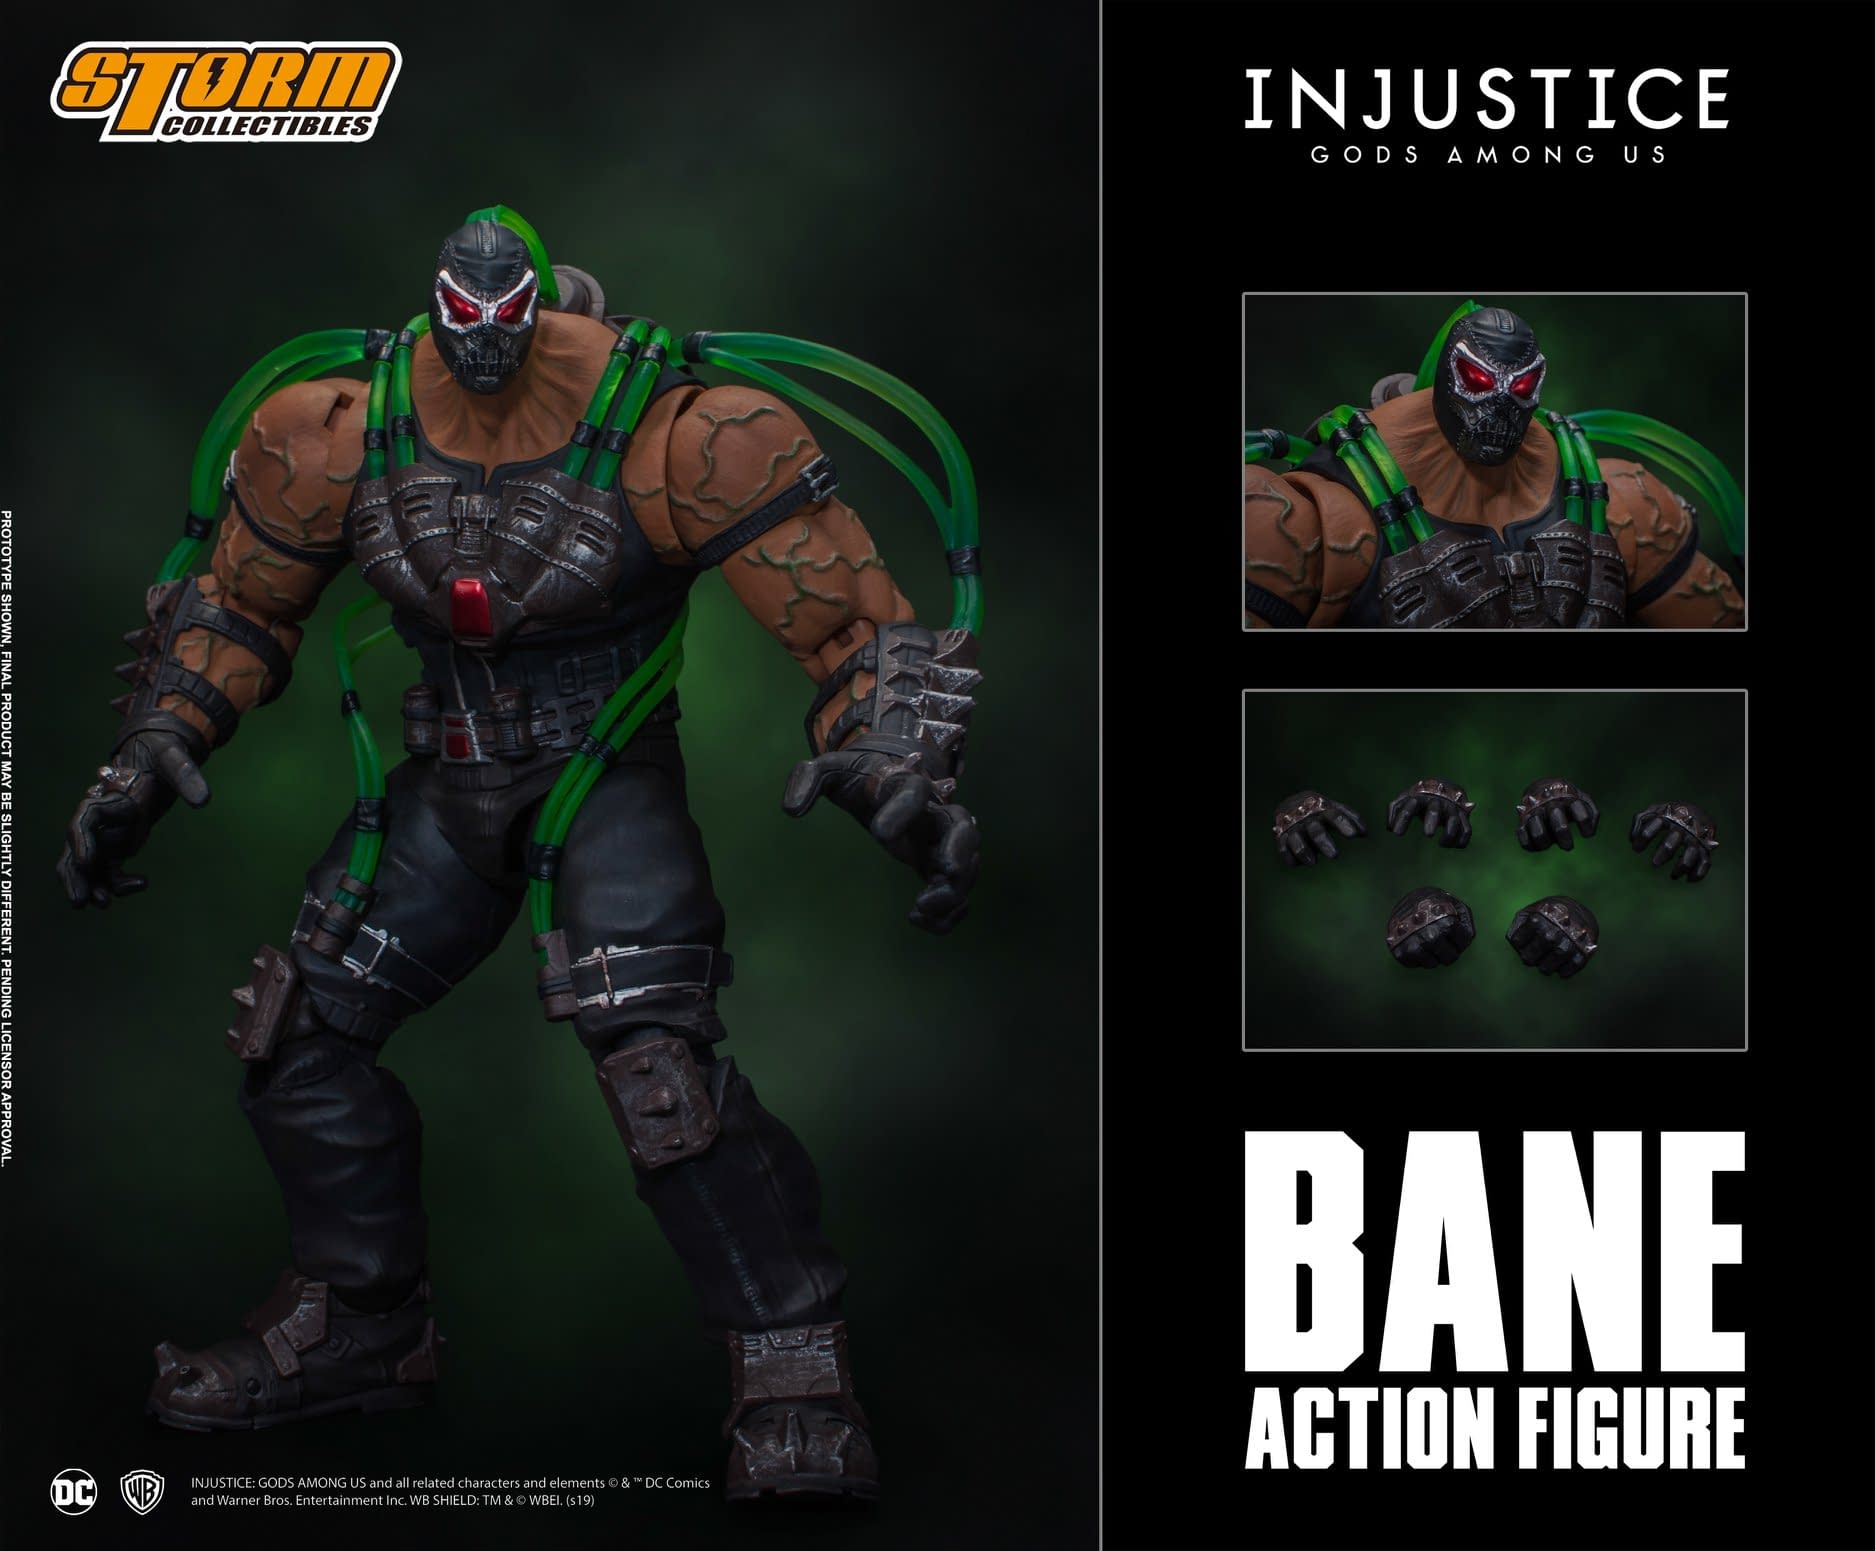 Bane Is Jucied and Ready to Rock with New Storm Collectibles Figure